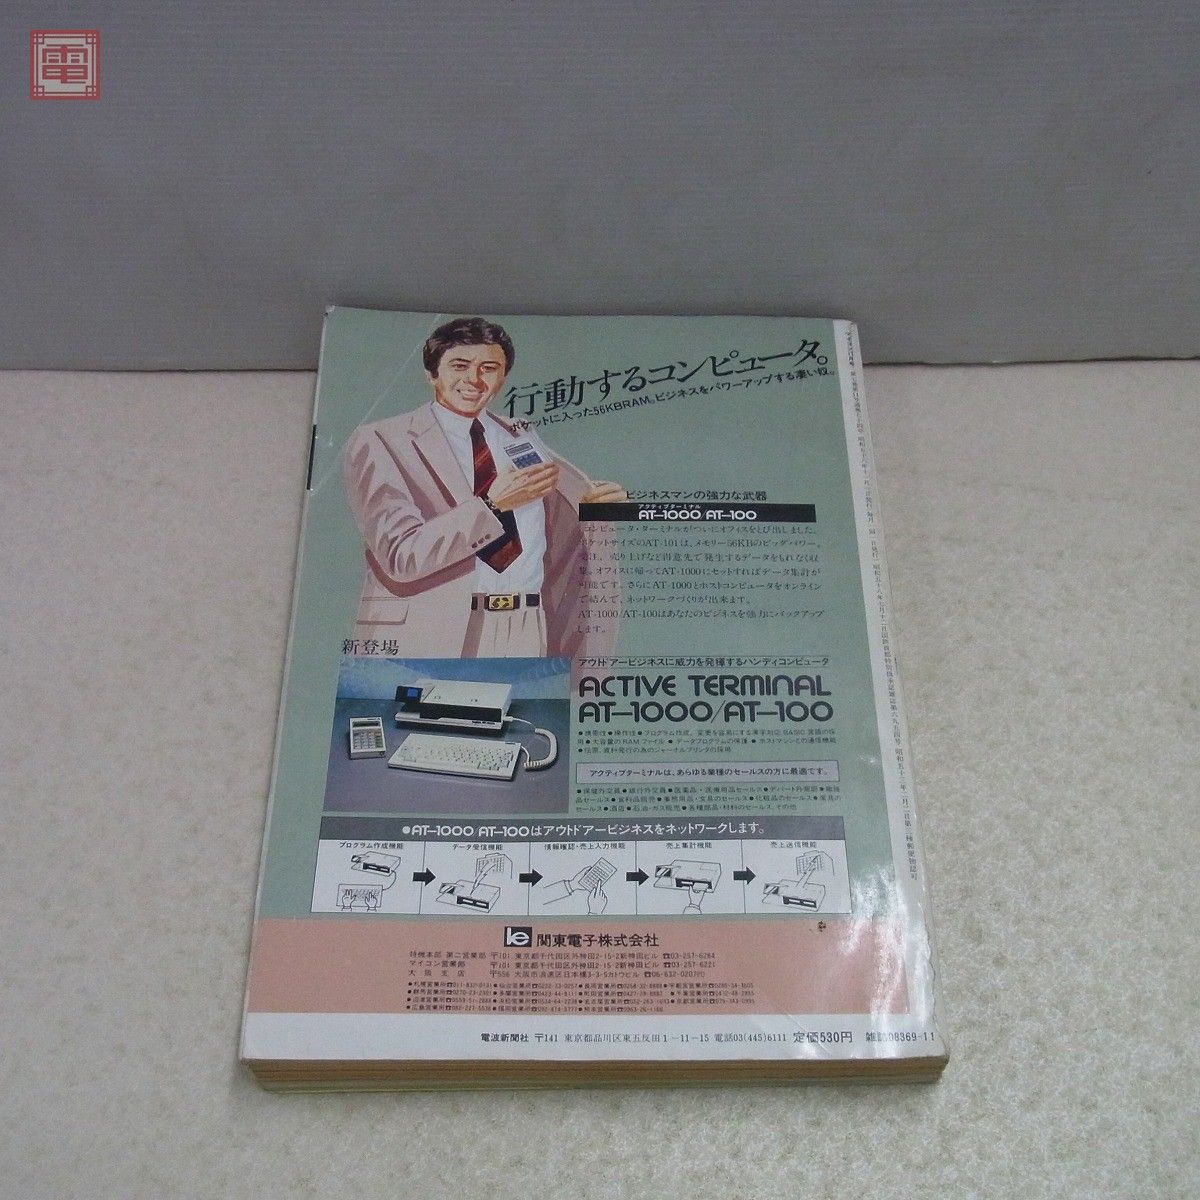  magazine monthly microcomputer 1983 year 3 pcs. set don't fit radio wave newspaper company [20